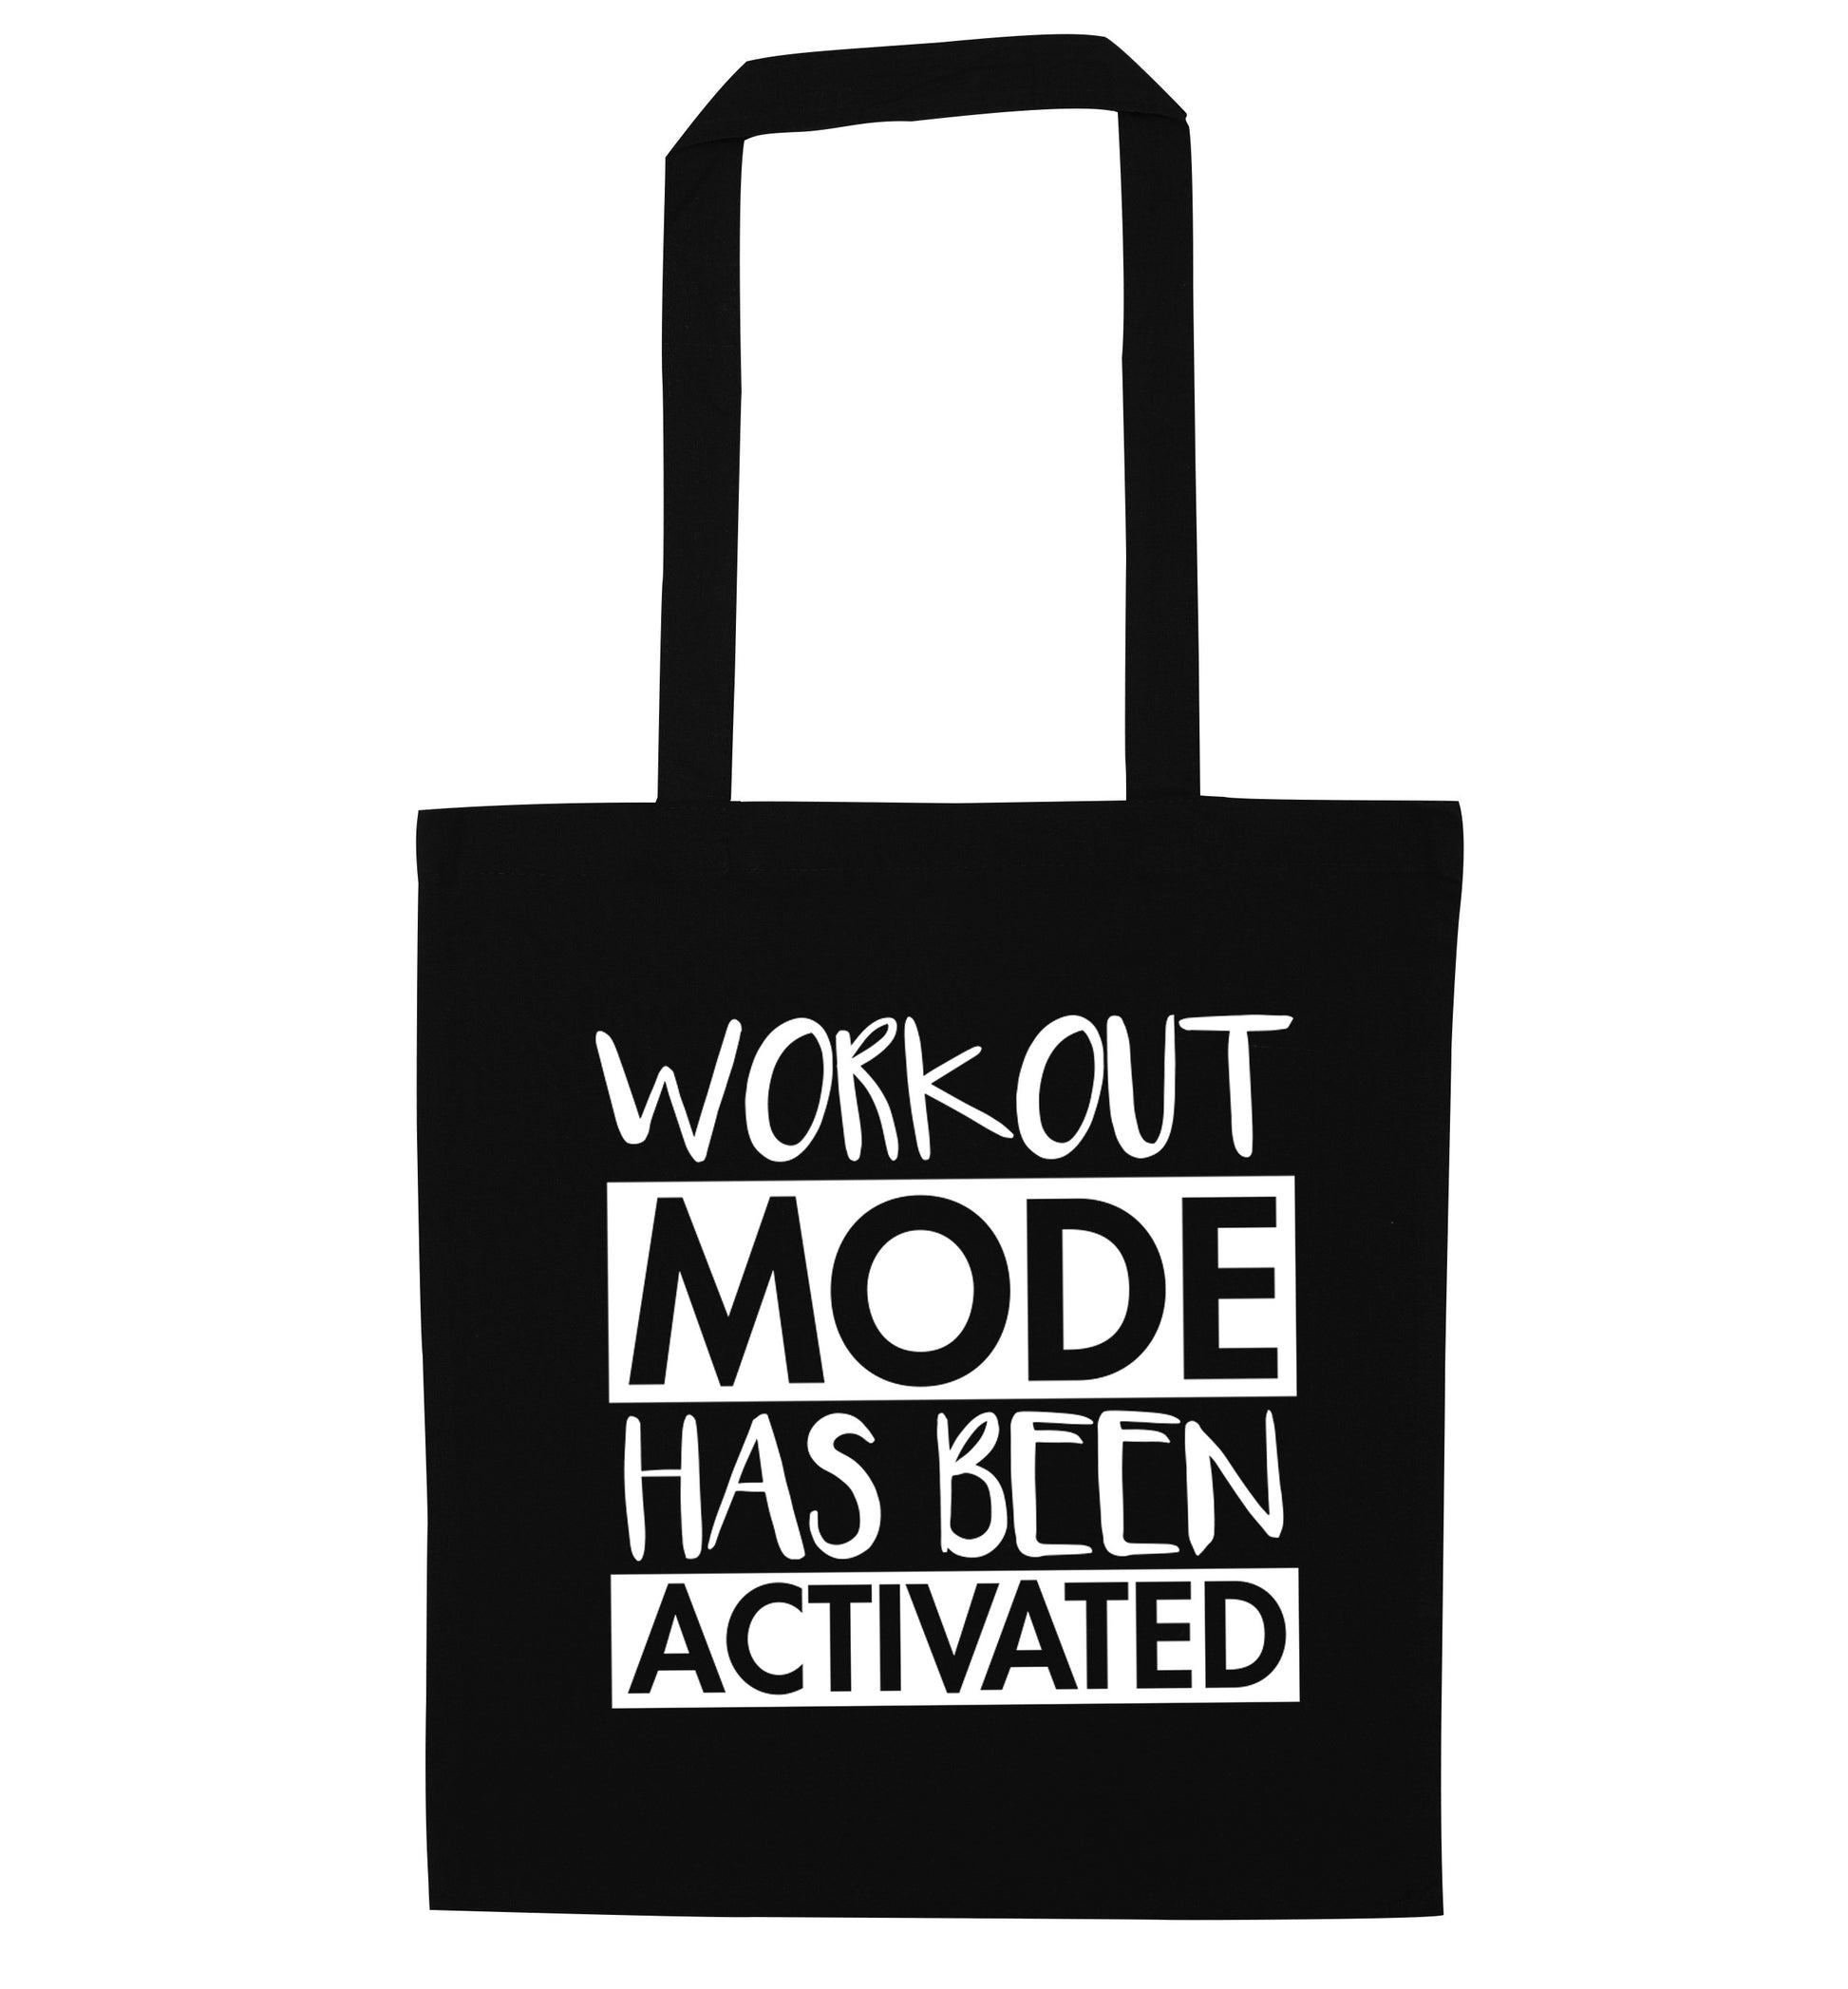 Workout mode has been activated black tote bag